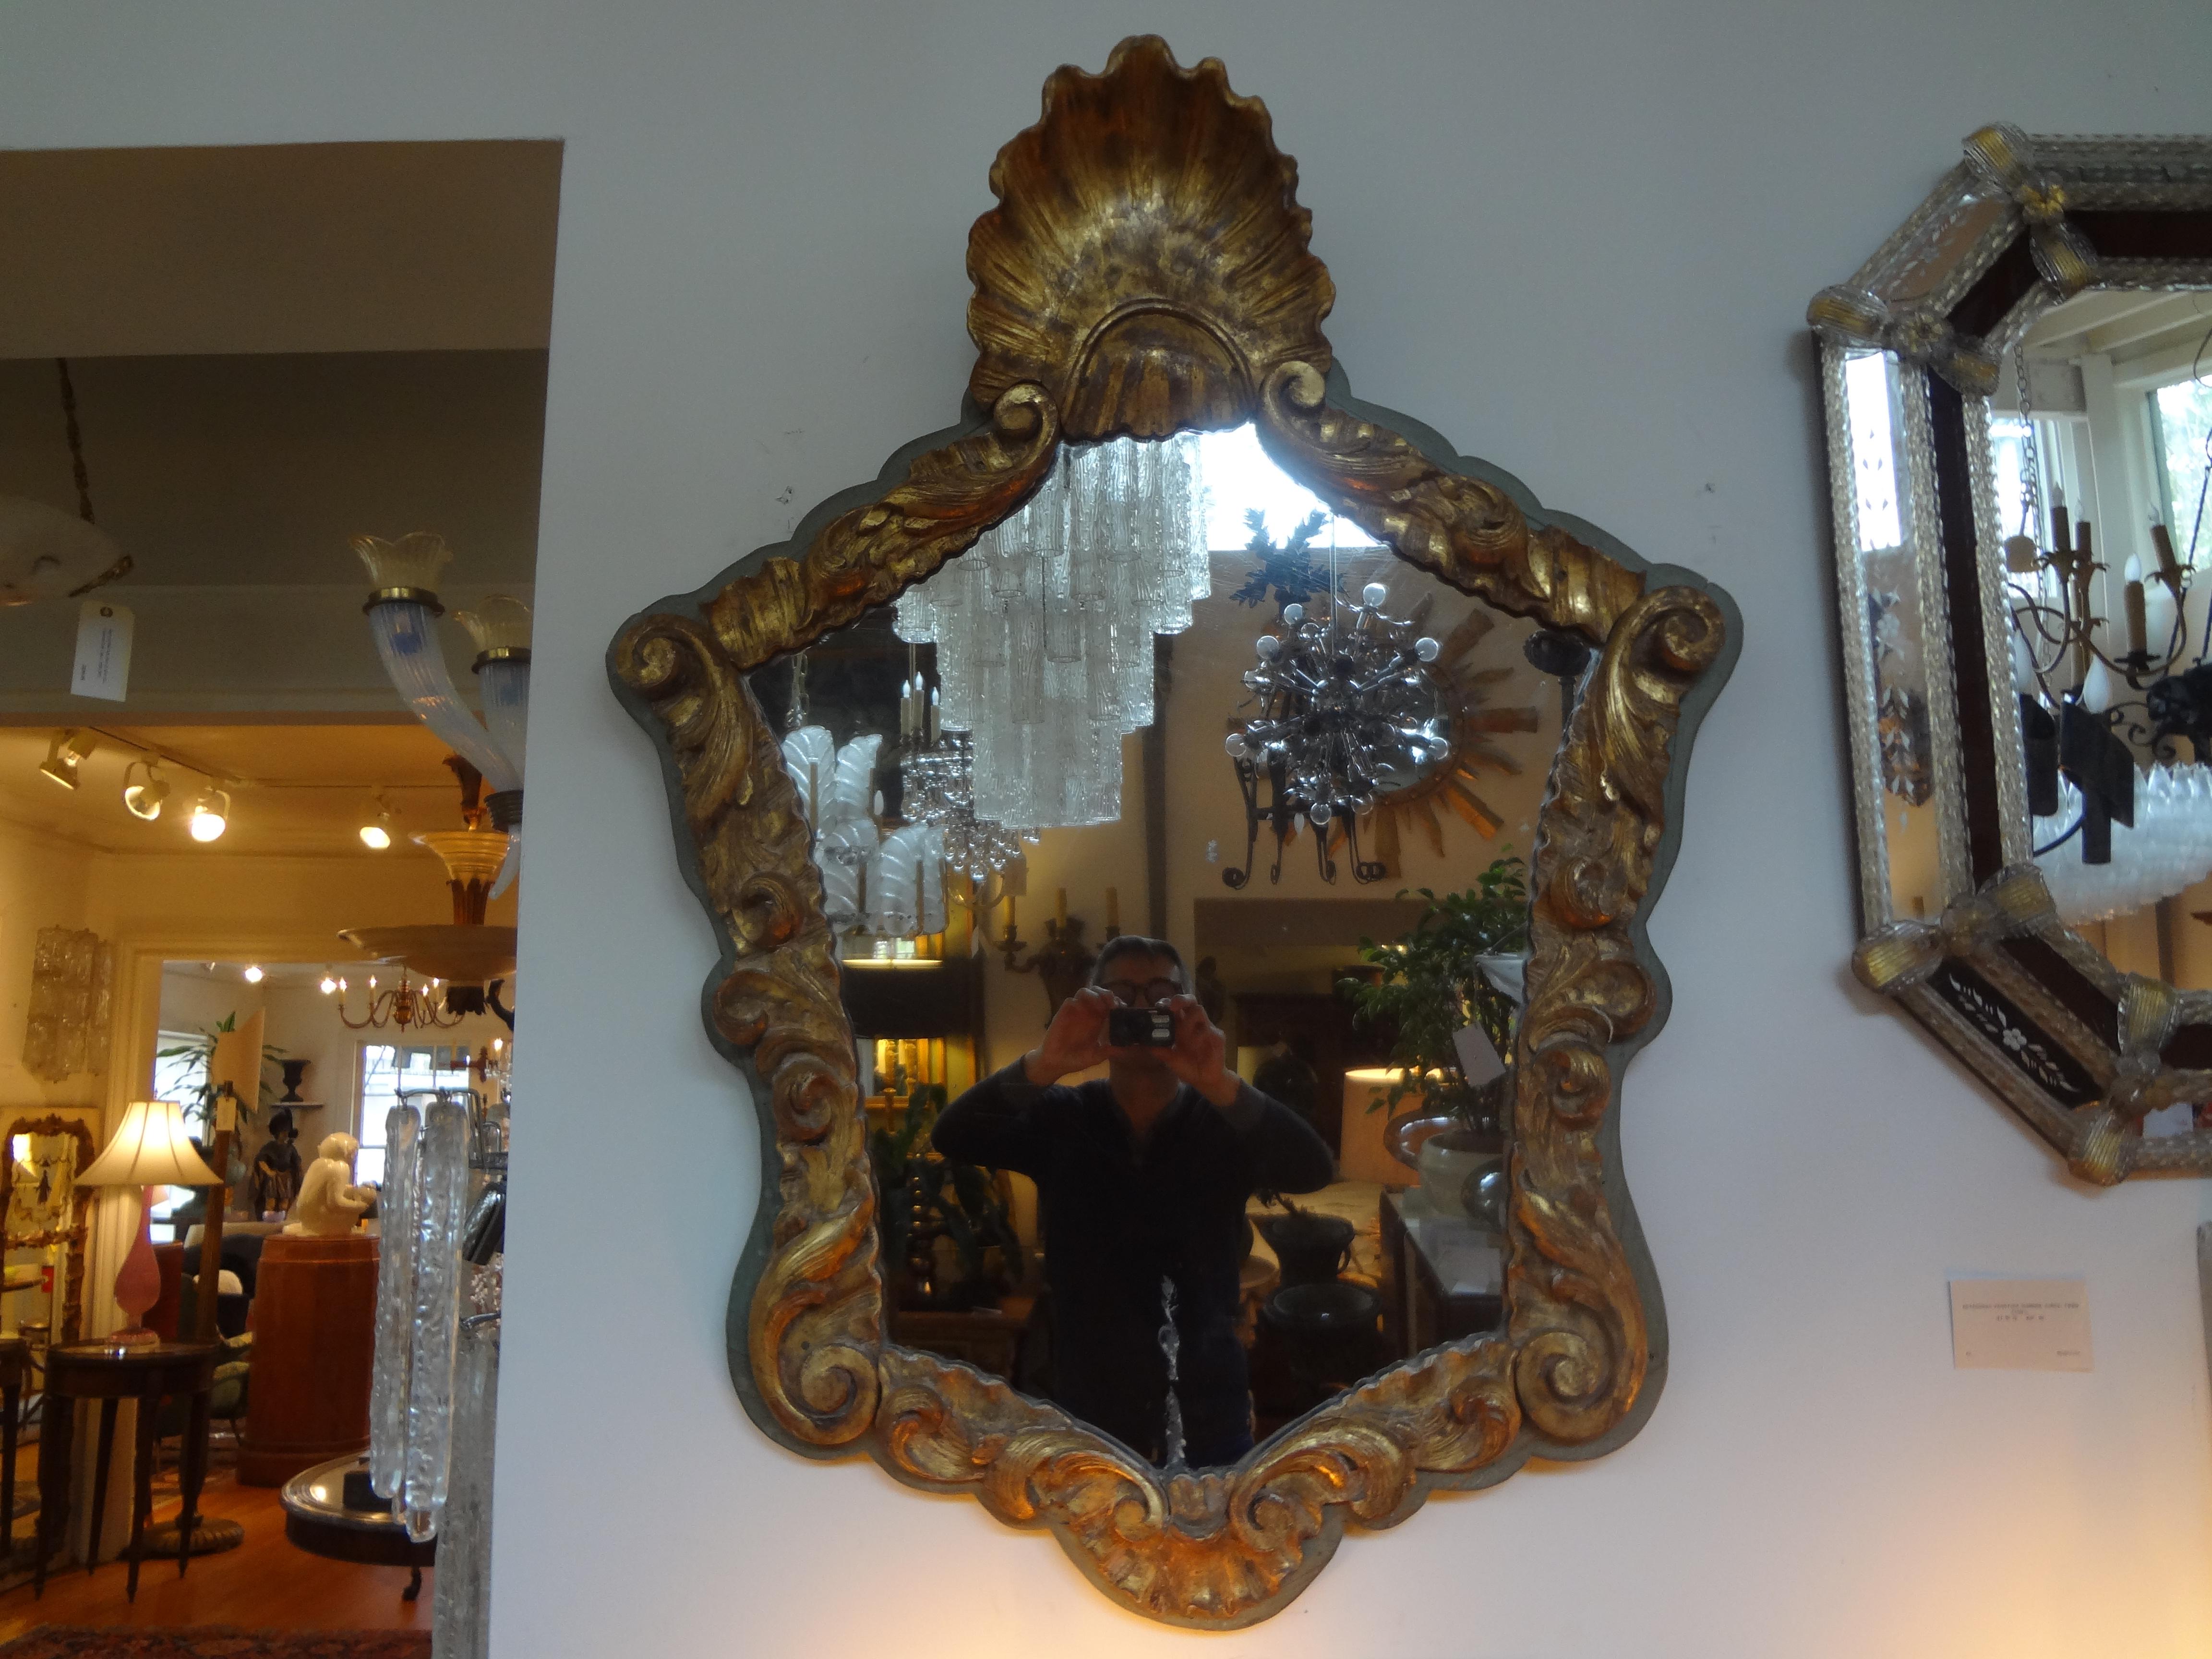 Stunning early 19th century Italian giltwood mirror with shell design. Well detailed with fabulous time worn patina to the gilt. This Italian giltwood mirror would work well in a variety of interiors and would be perfect in a powder bath.